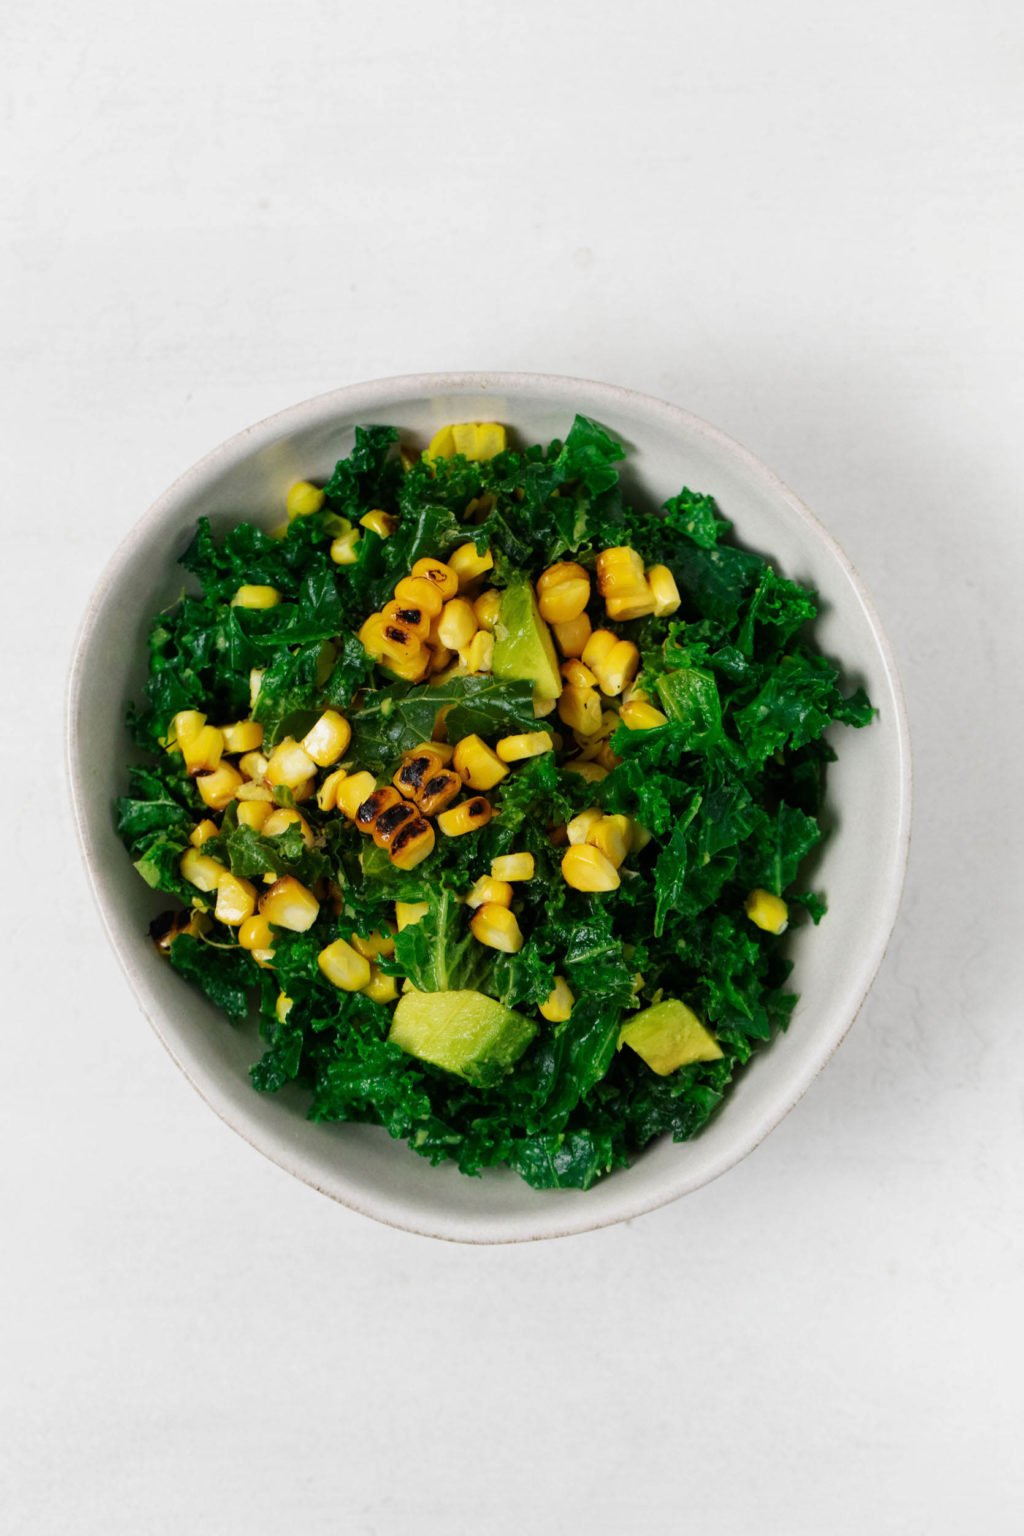 A vegan grilled corn avocado salad with kale has been served in a white ceramic bowl.